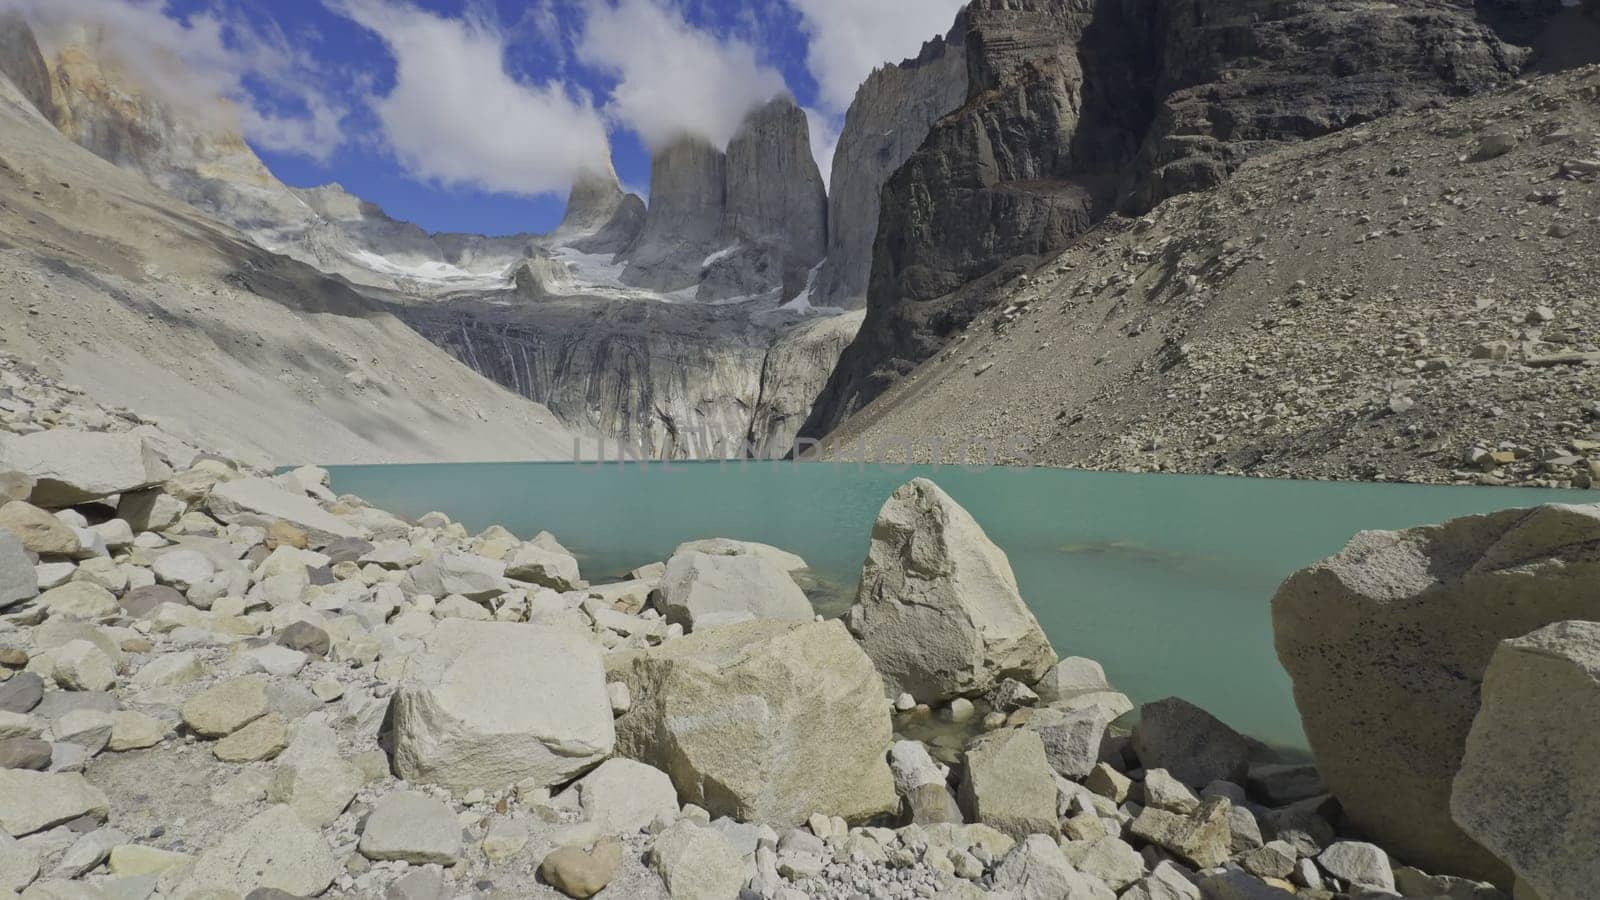 Scenic video of a turquoise lake with the majestic Torres del Paine in the background, devoid of any people.